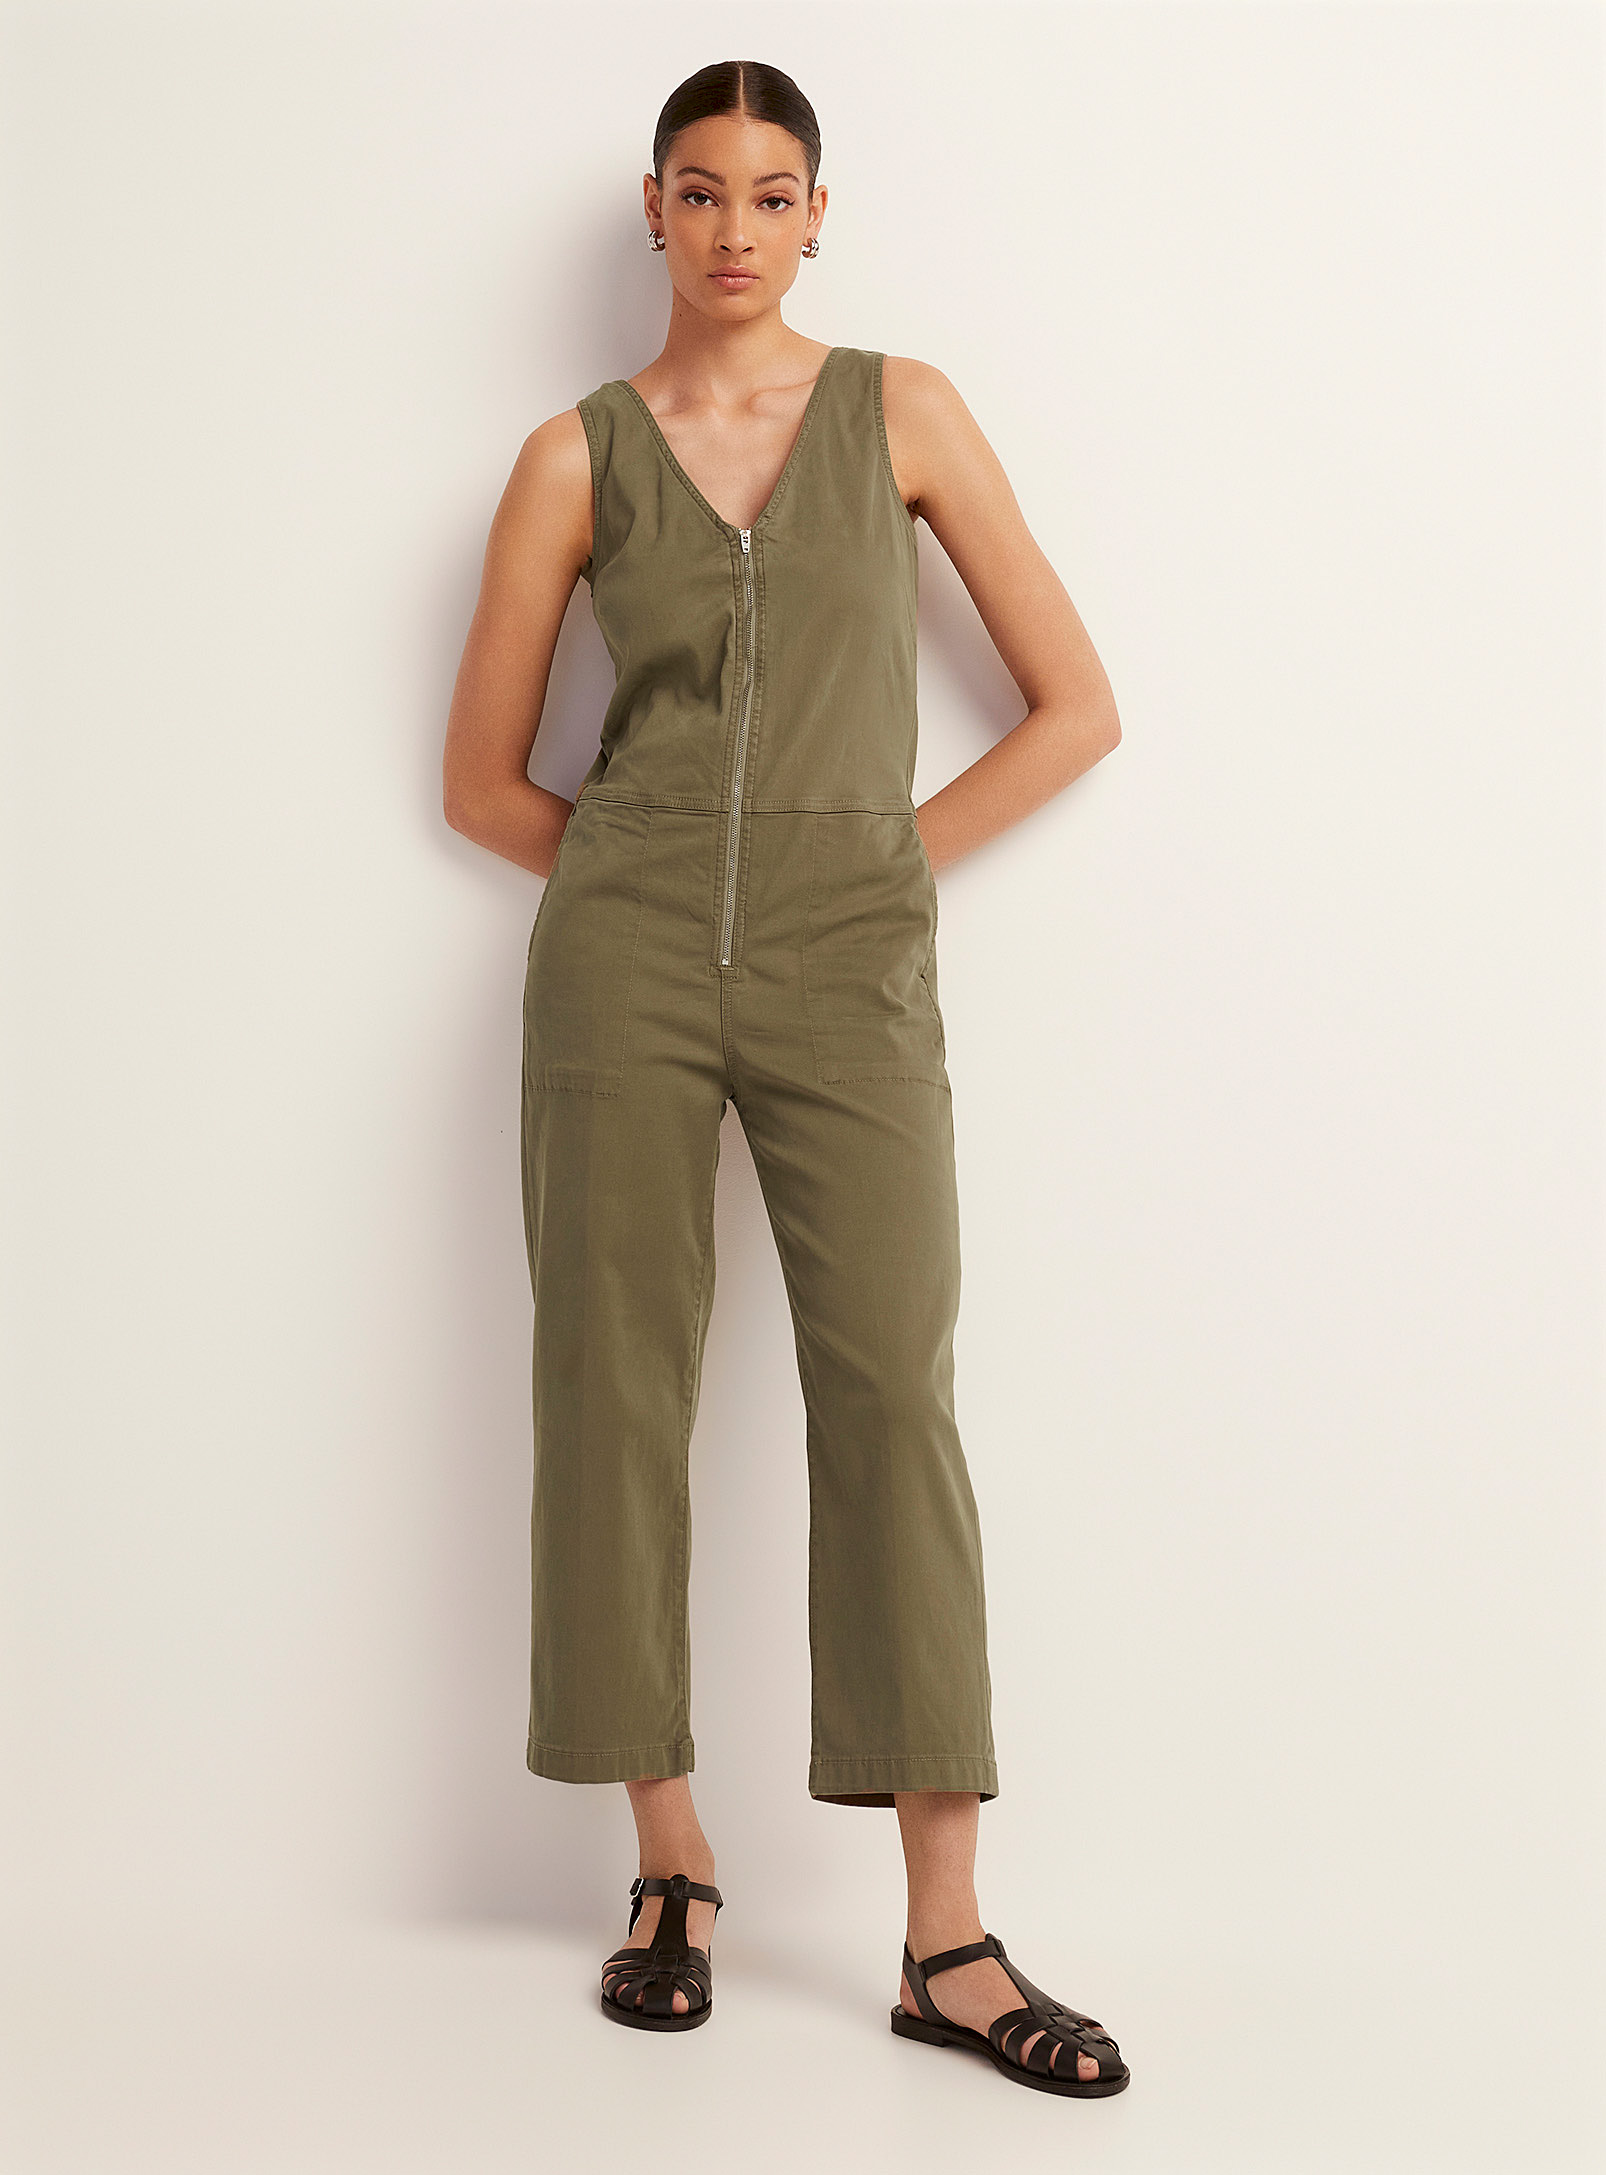 DUER - Live Free cotton and lyocell jumpsuit